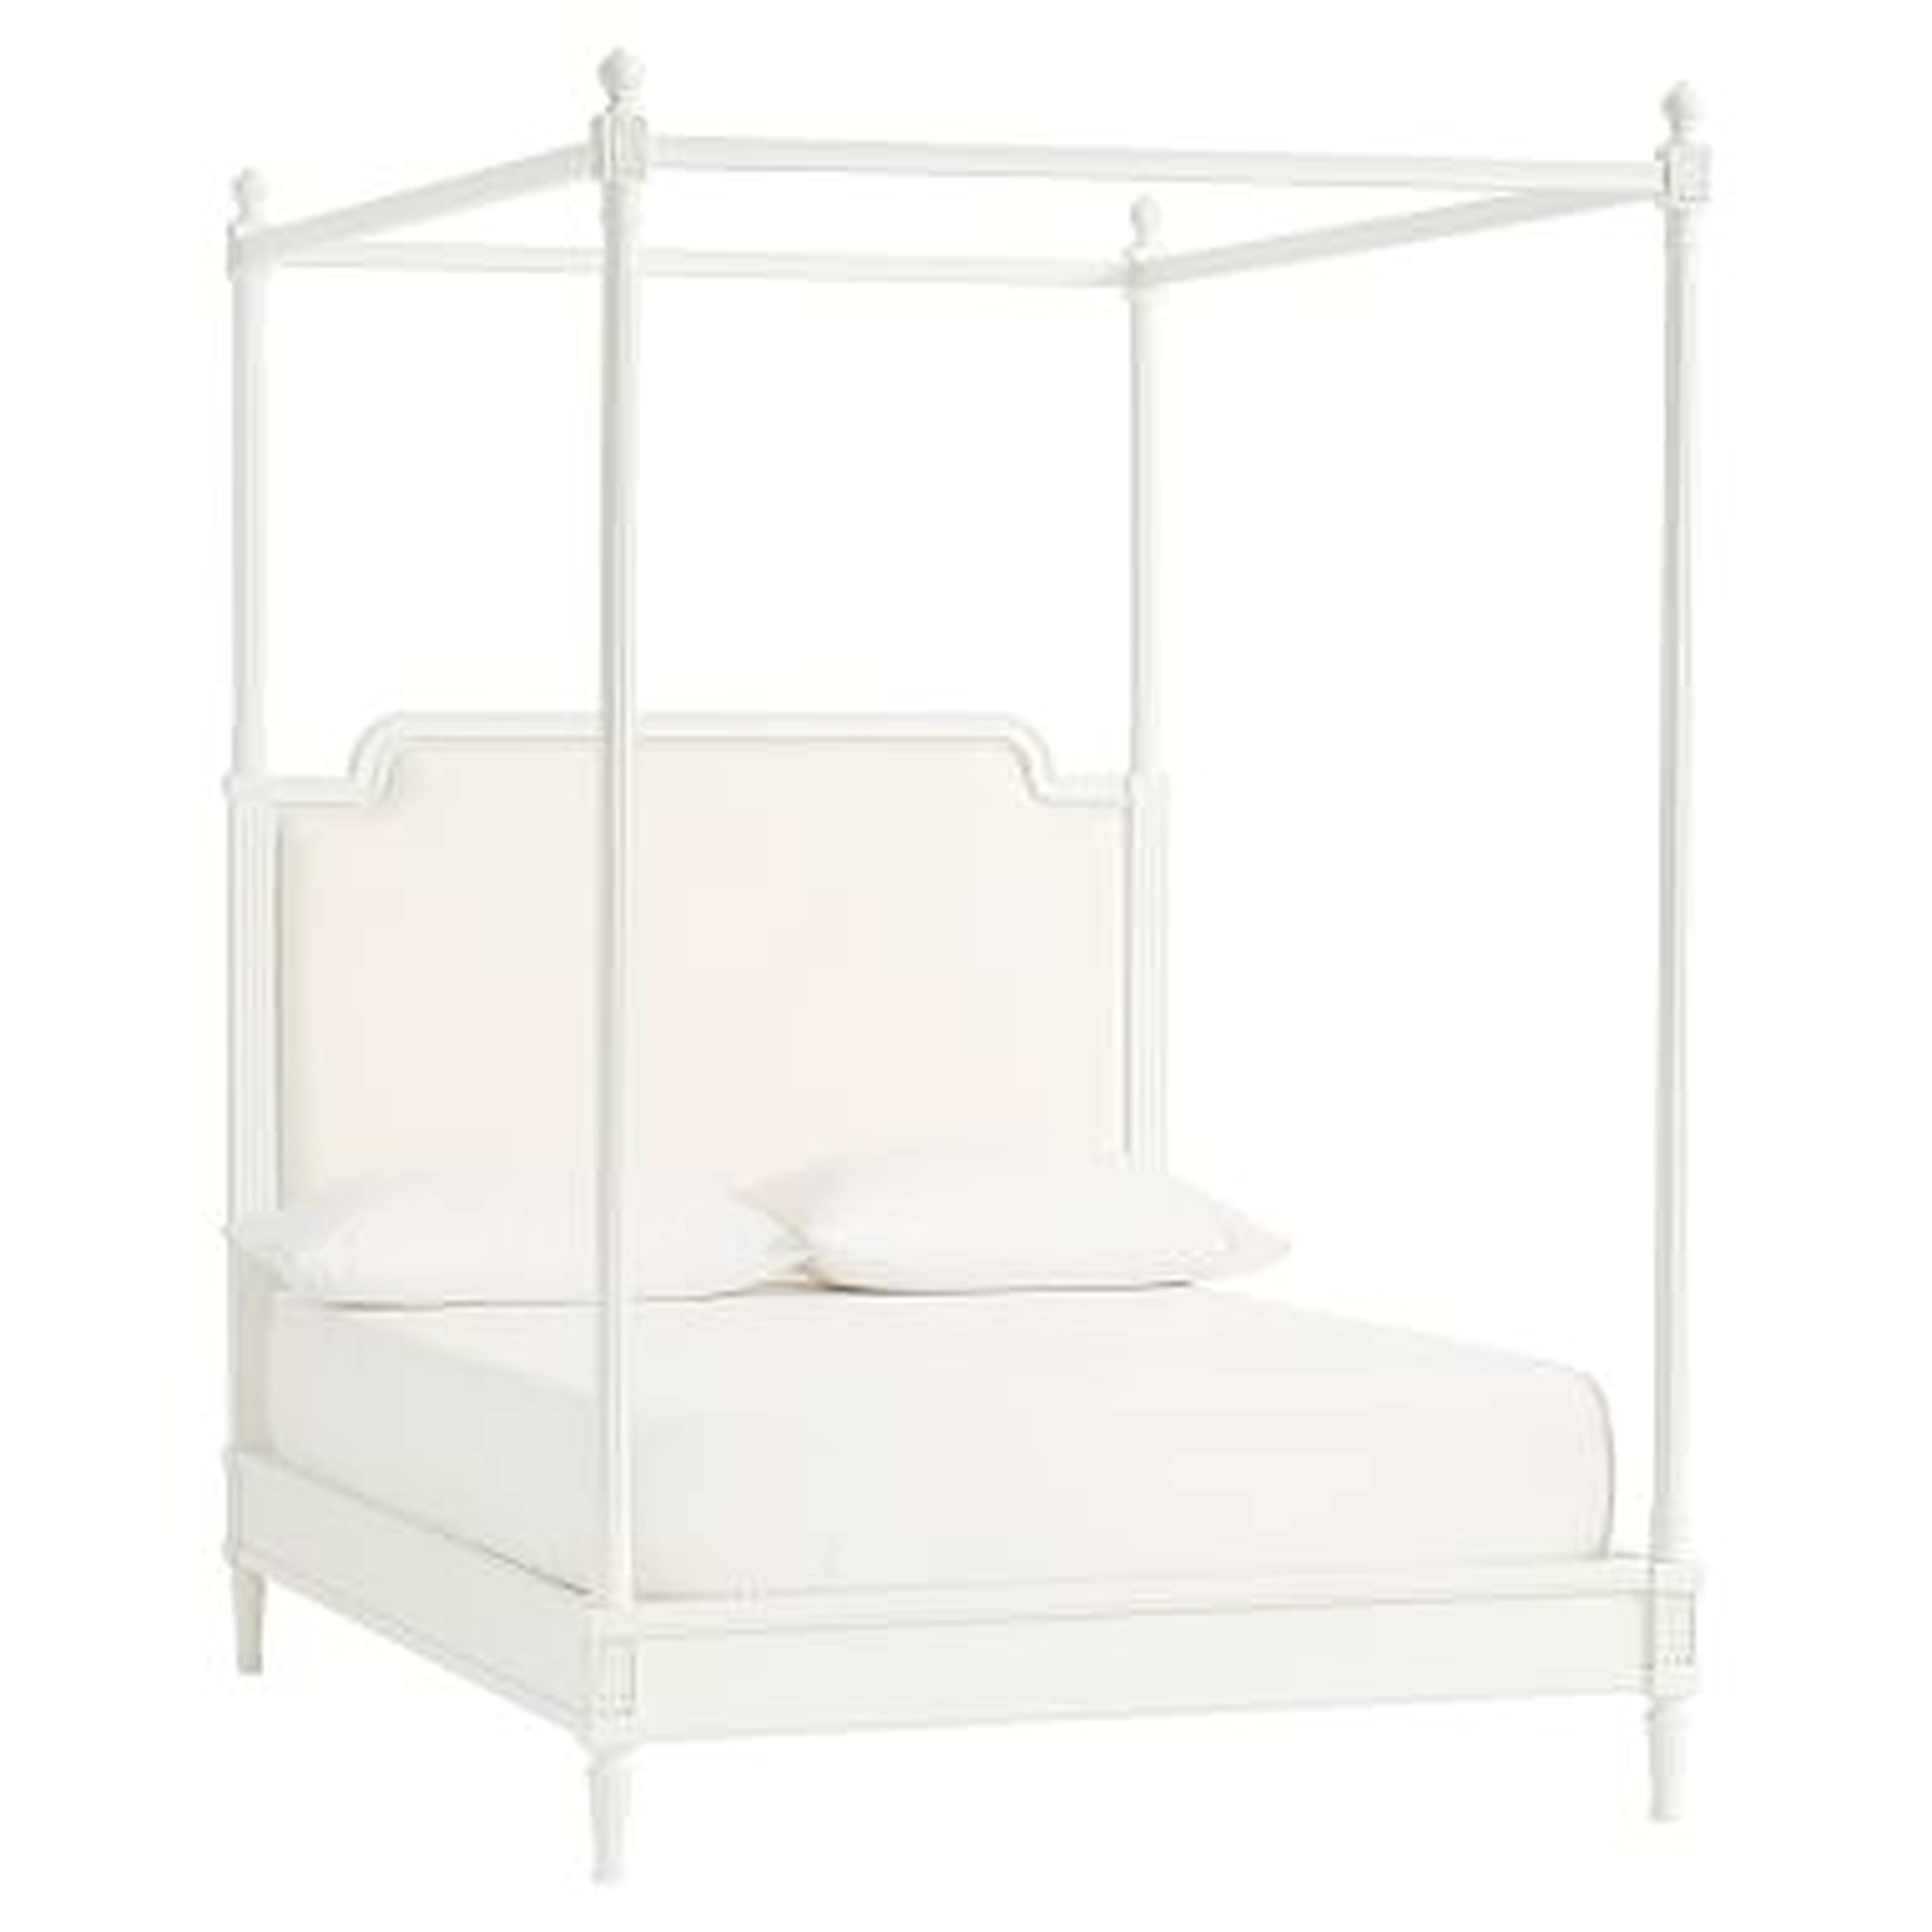 Colette Canopy Bed, Full, Water-Based Simply White - Pottery Barn Teen